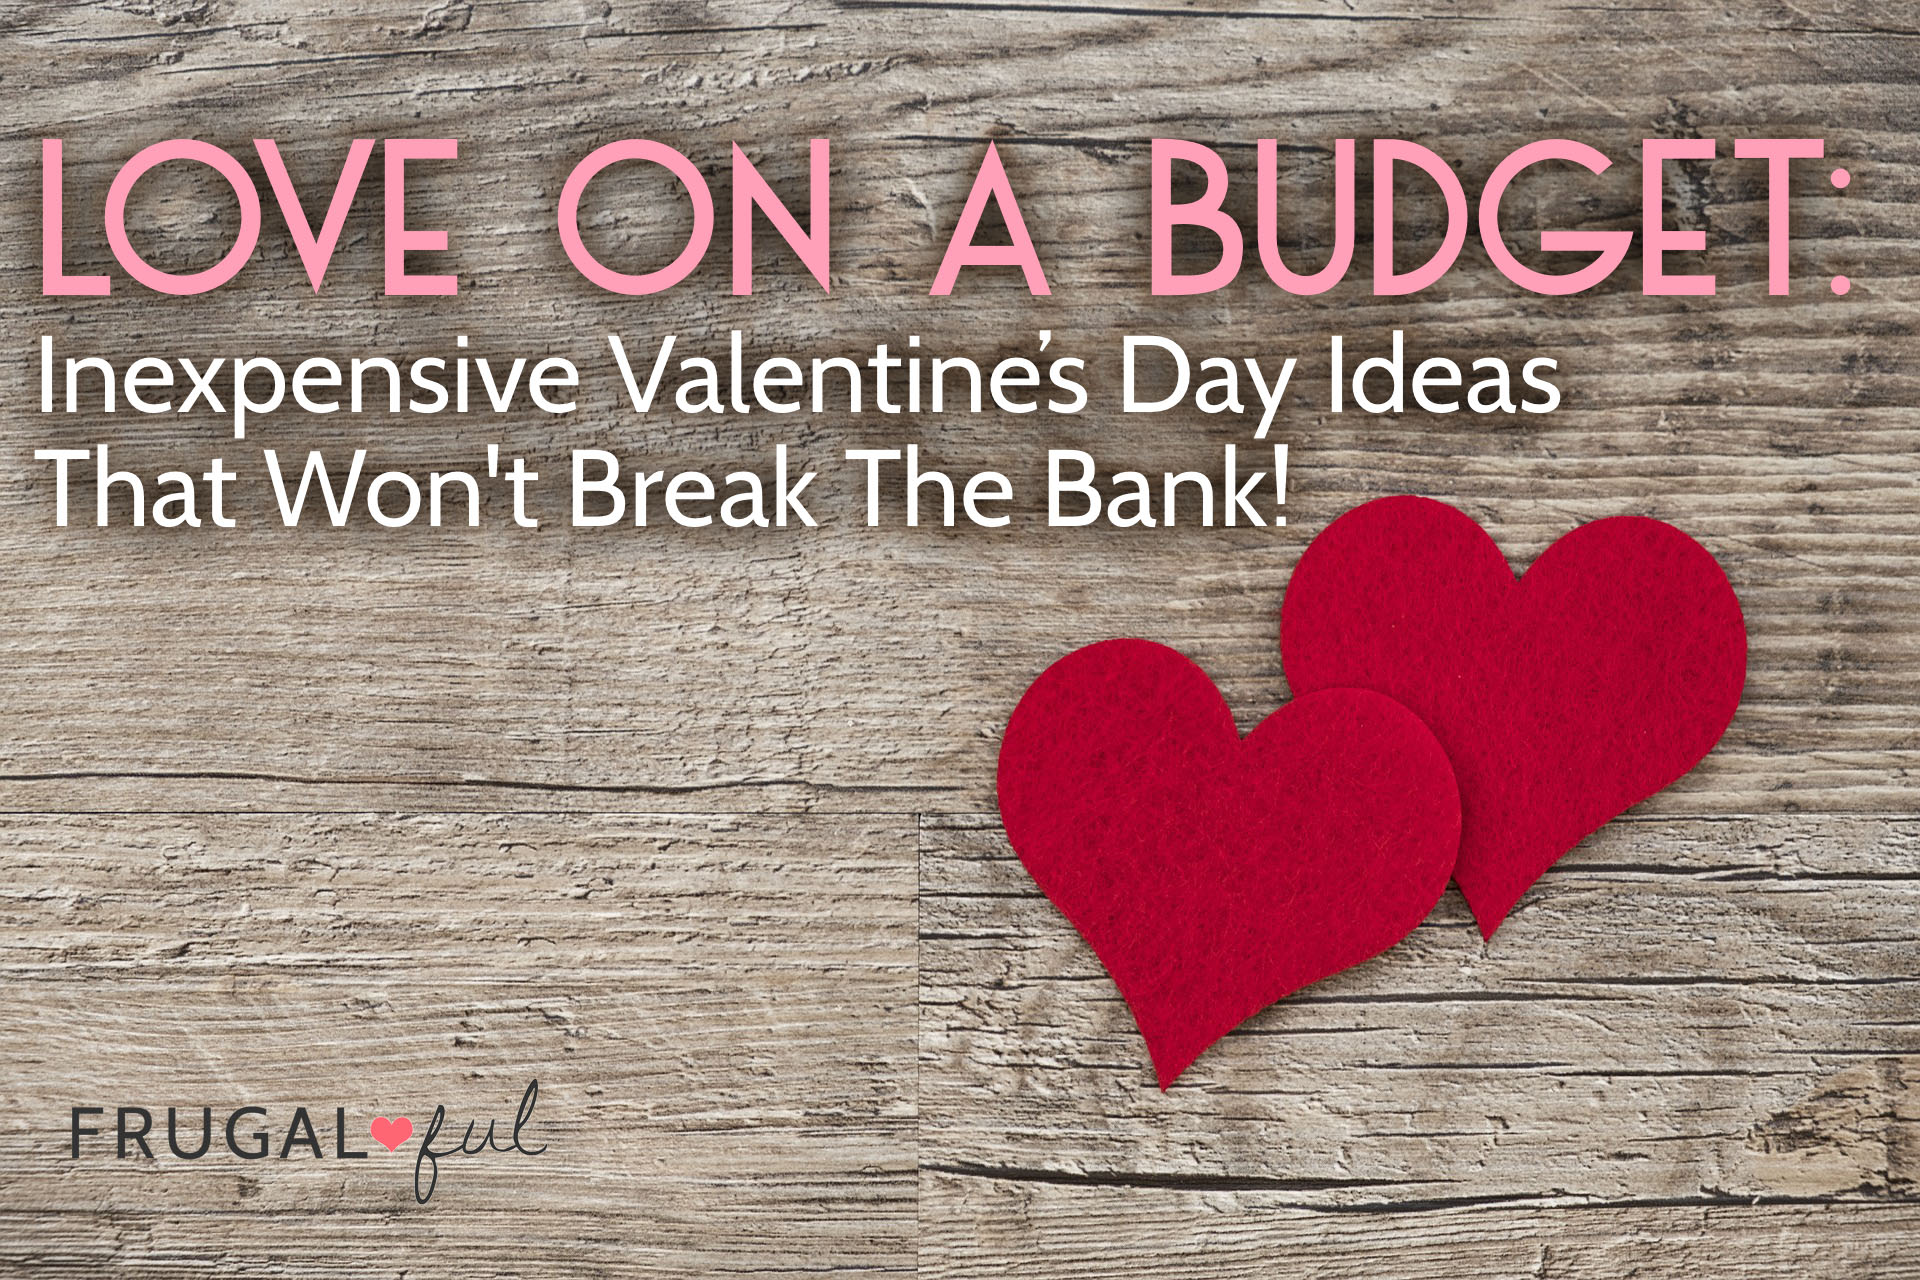 Love On A Budget: Inexpensive Valentine’s Day Ideas That Won’t Break The Bank!